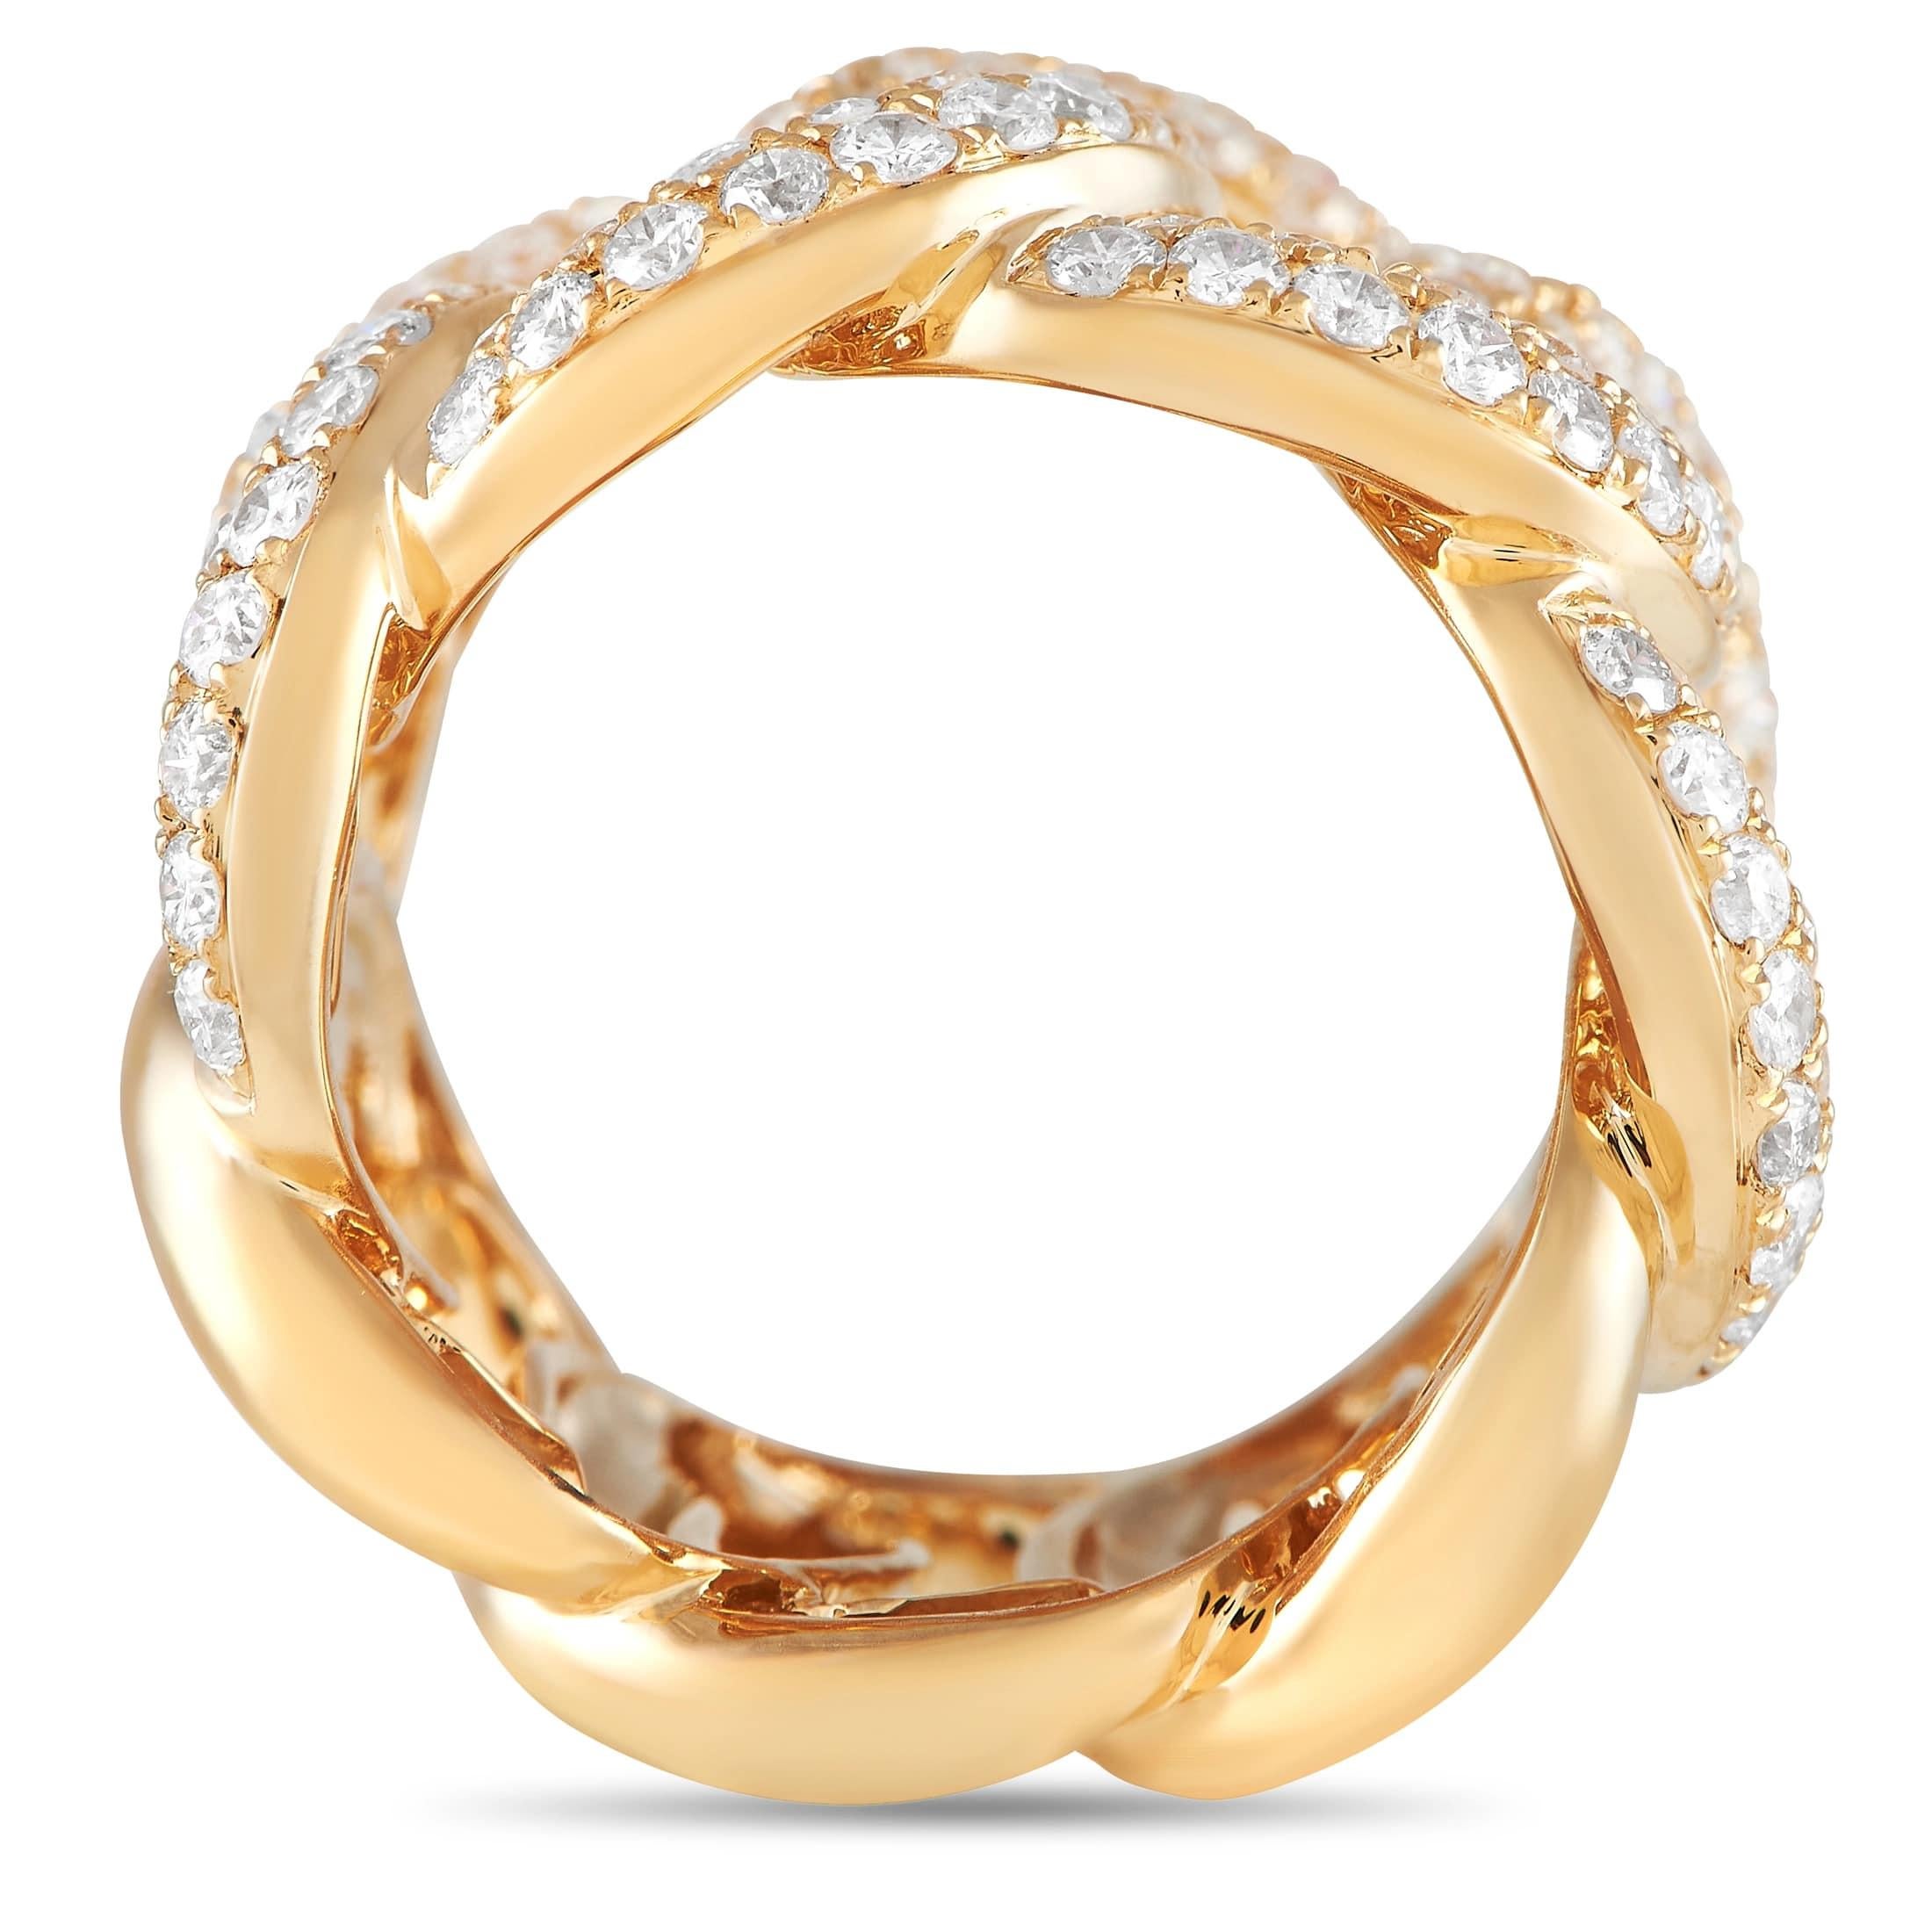 A fashion-forward statement ring that's sure to draw attention. Crafted in 18K yellow gold, the 18mm wide band features a series of interlocking rings traced with two rows of diamonds. Expect this ring to lend a hint of movement and edgy elegance to